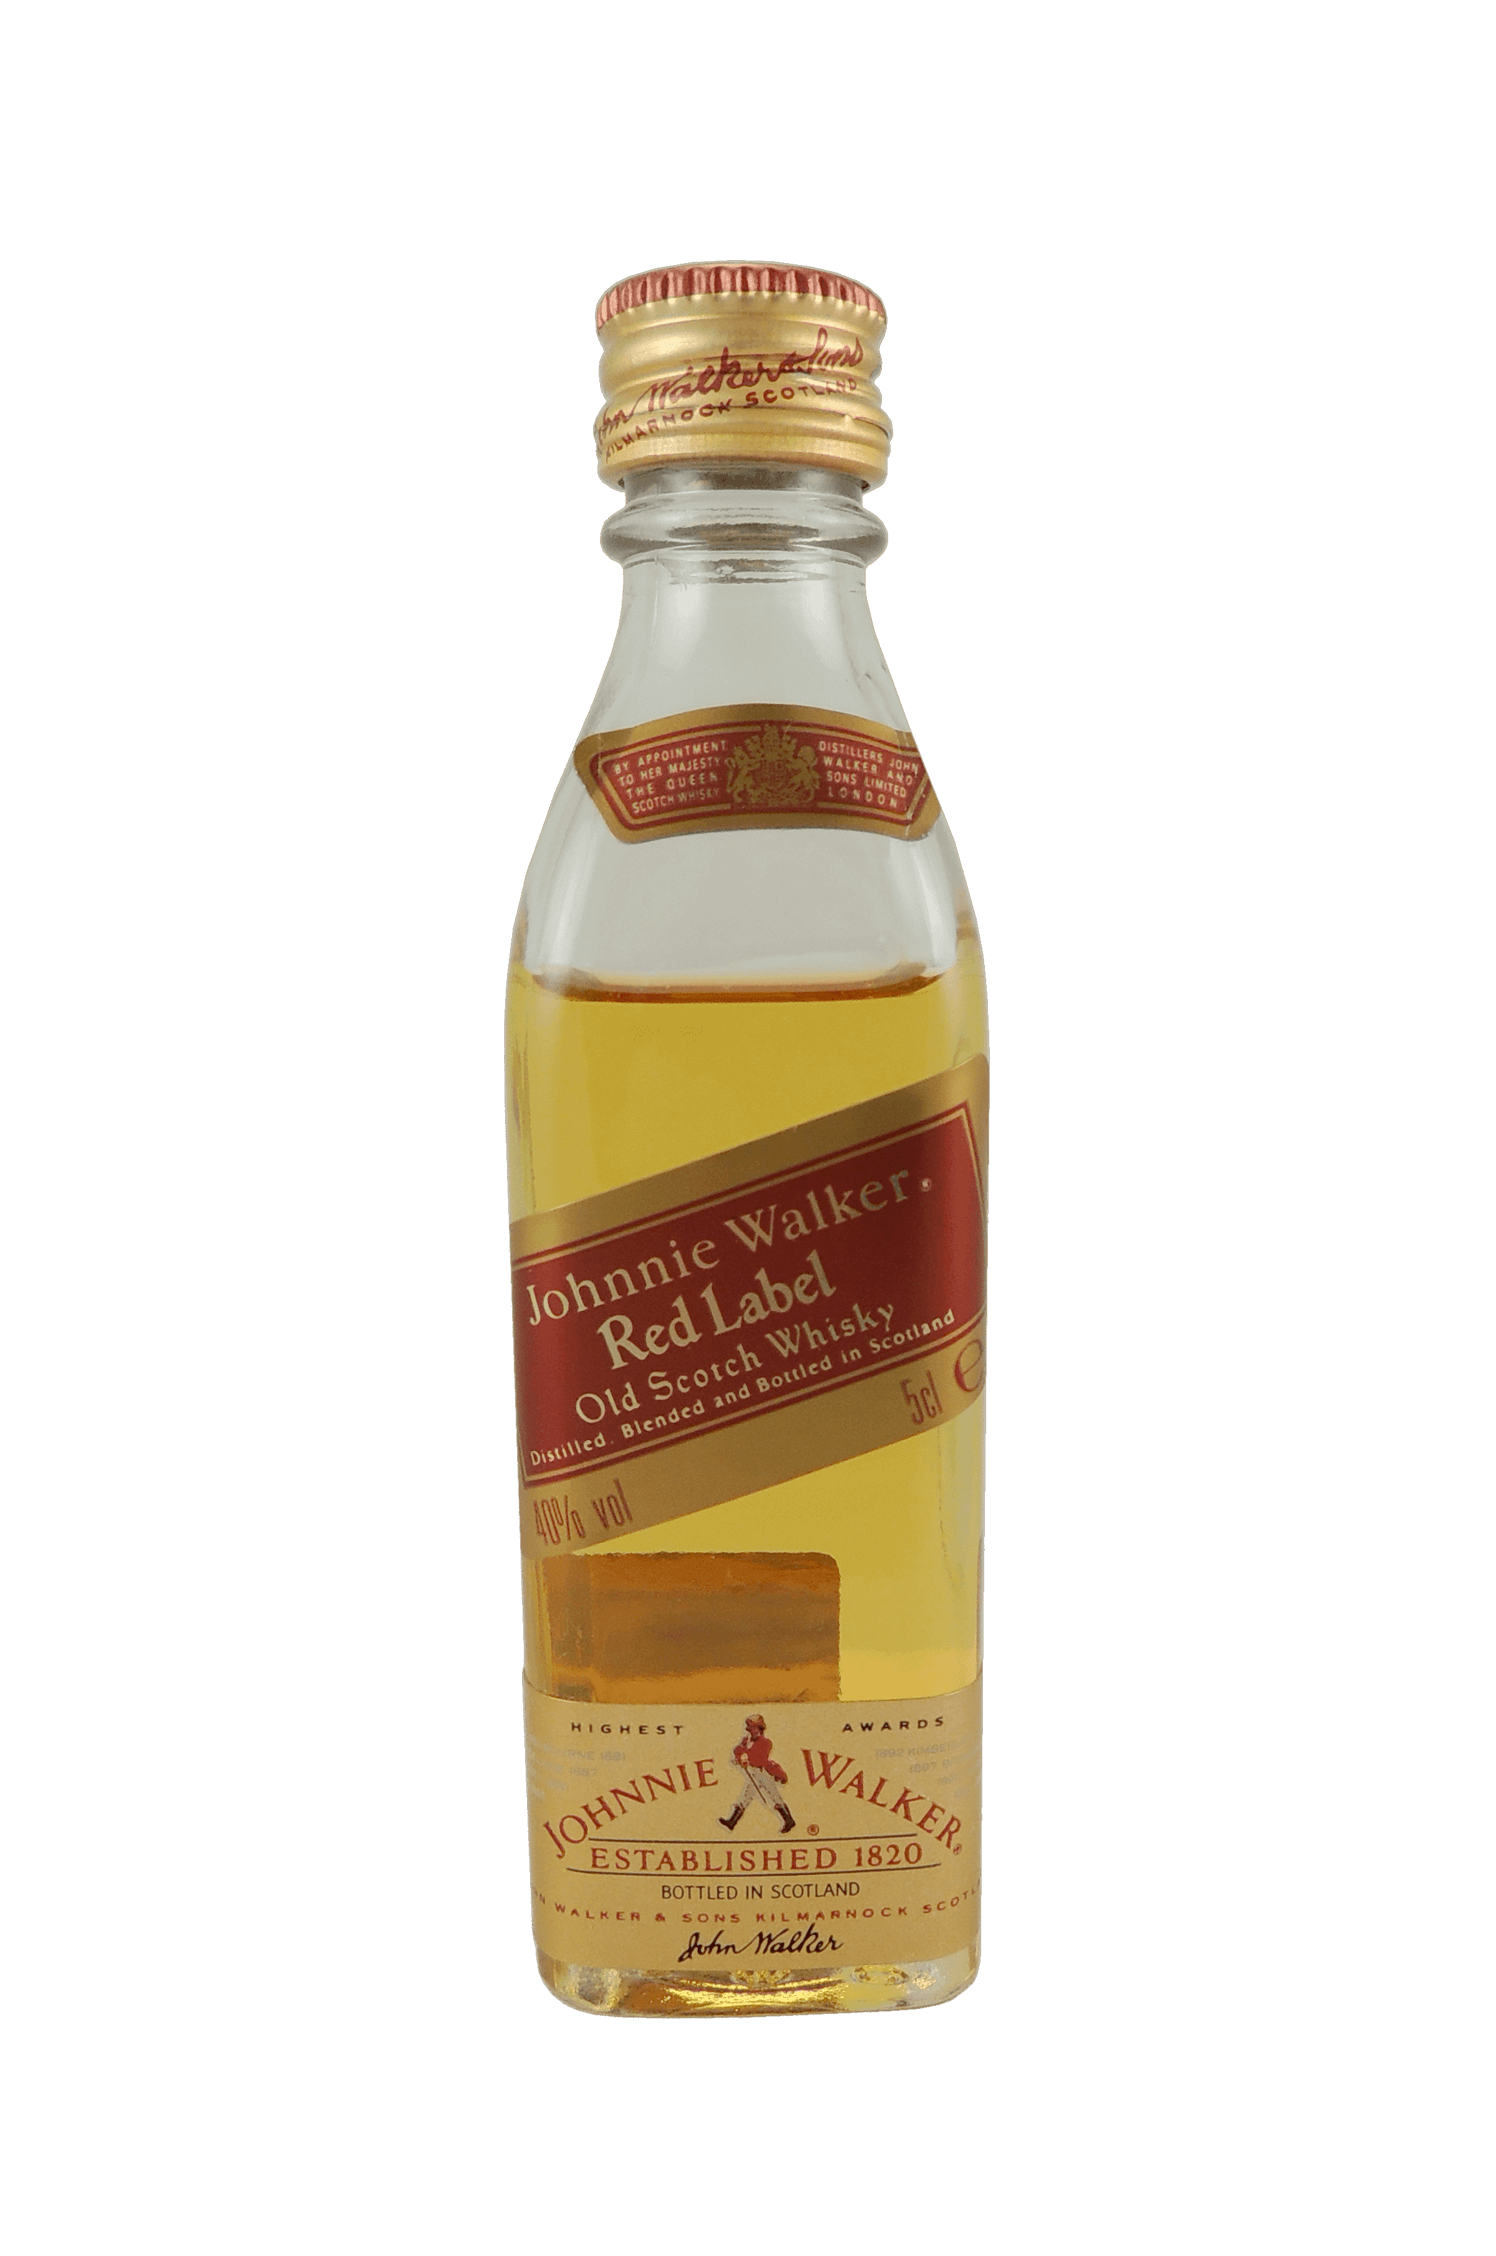 Red Label Old Scotch Whisky